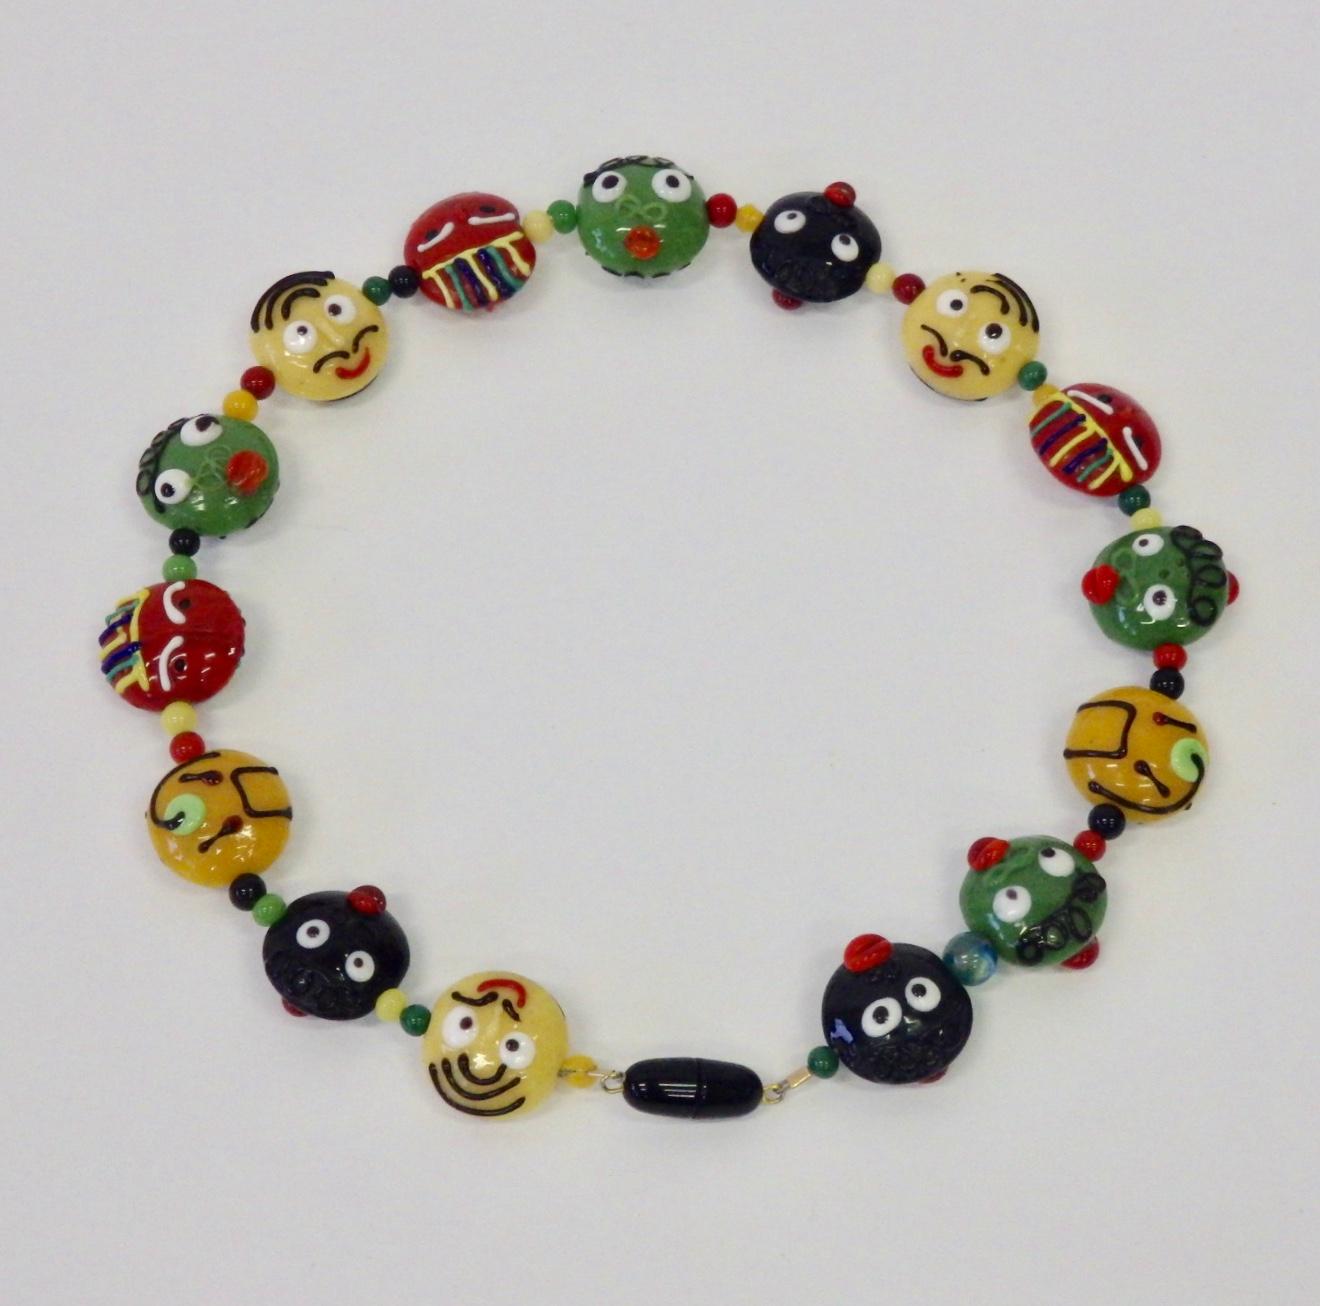 Whimsical Italian glass necklace. Depicting different oddly funny faces.